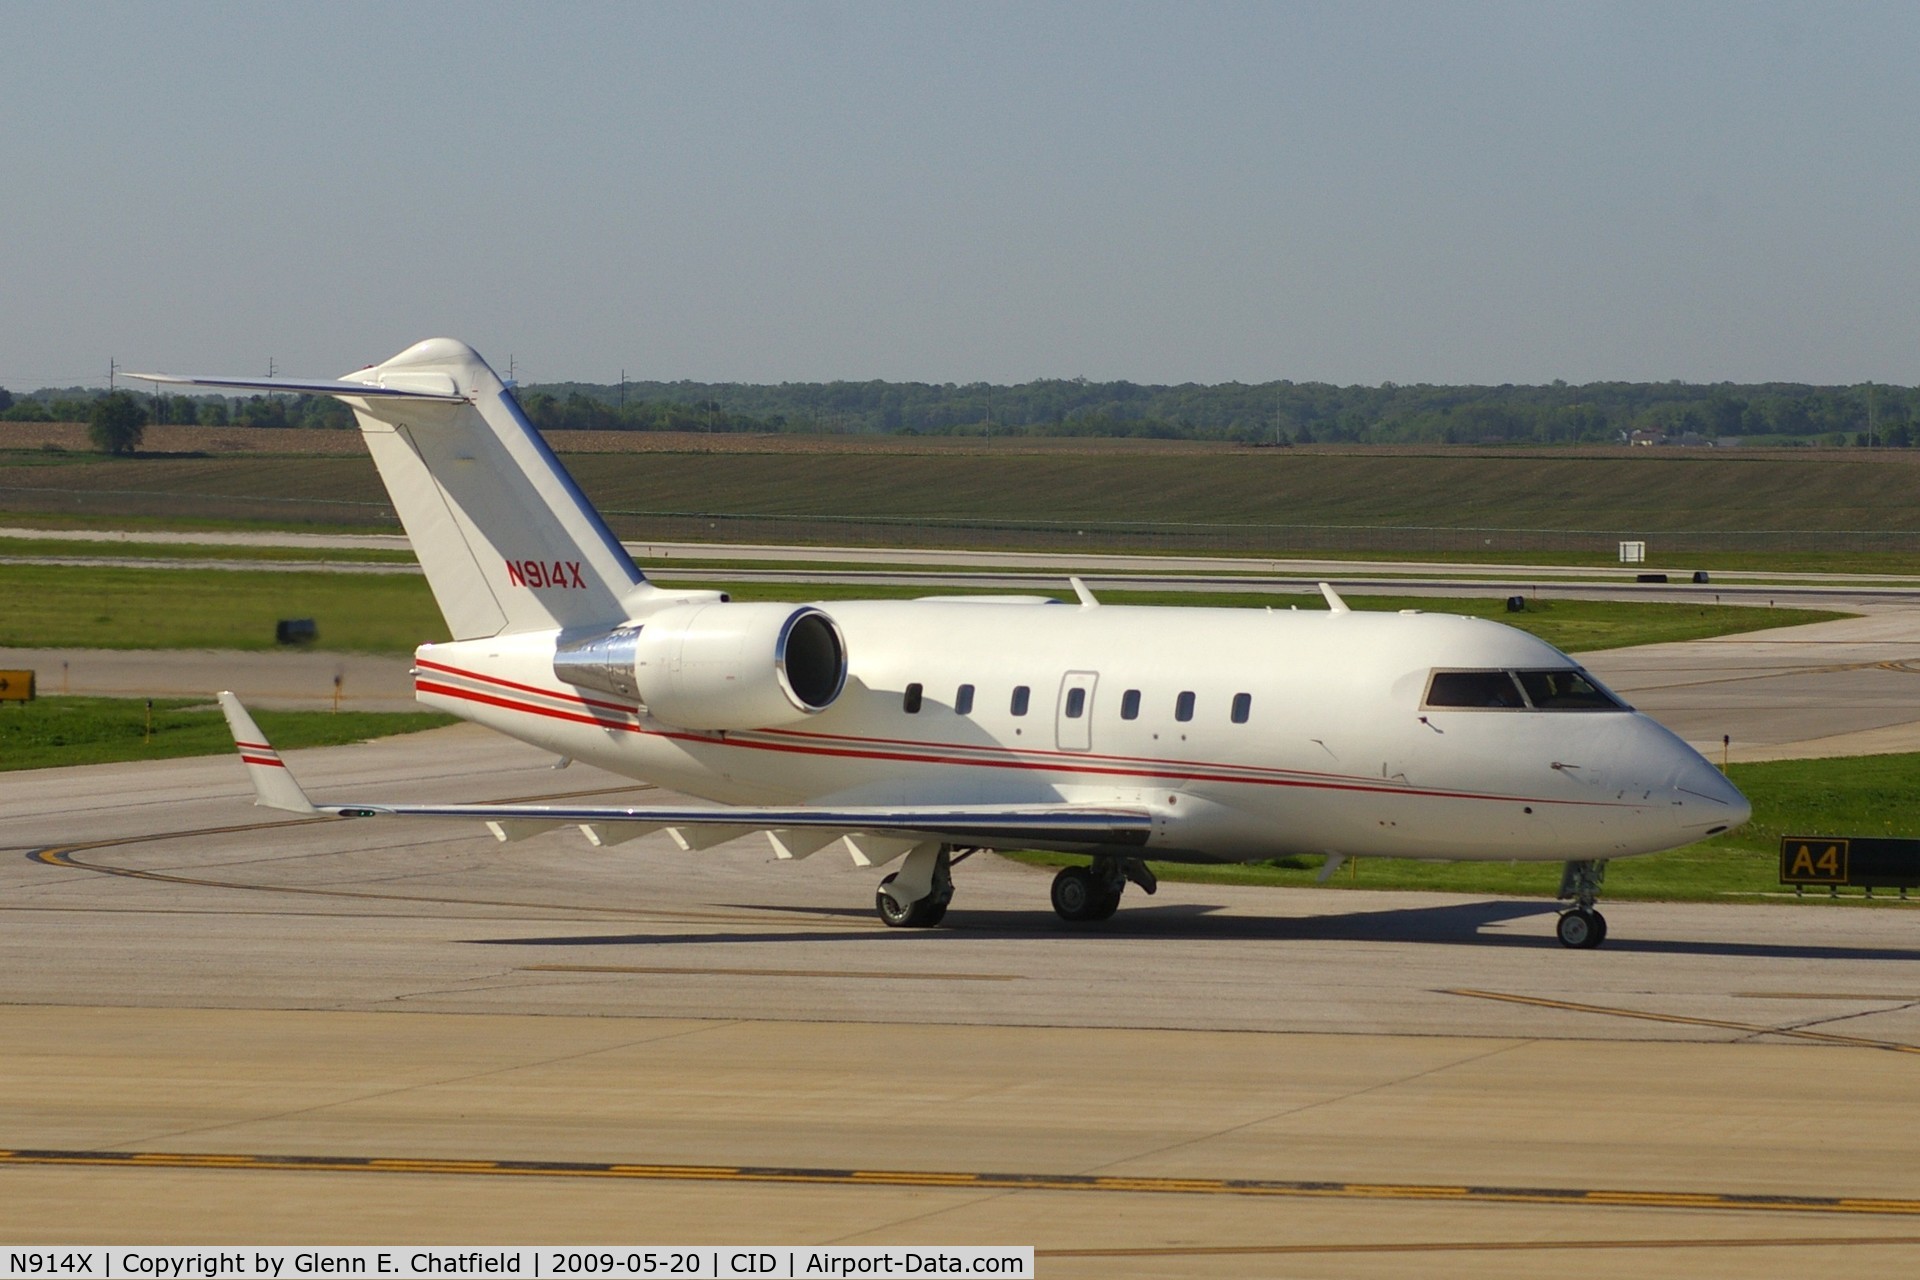 N914X, 1995 Canadair Challenger 601-3R (CL-600-2B16) C/N 5185, On Delta taxiway on the way to Landmark